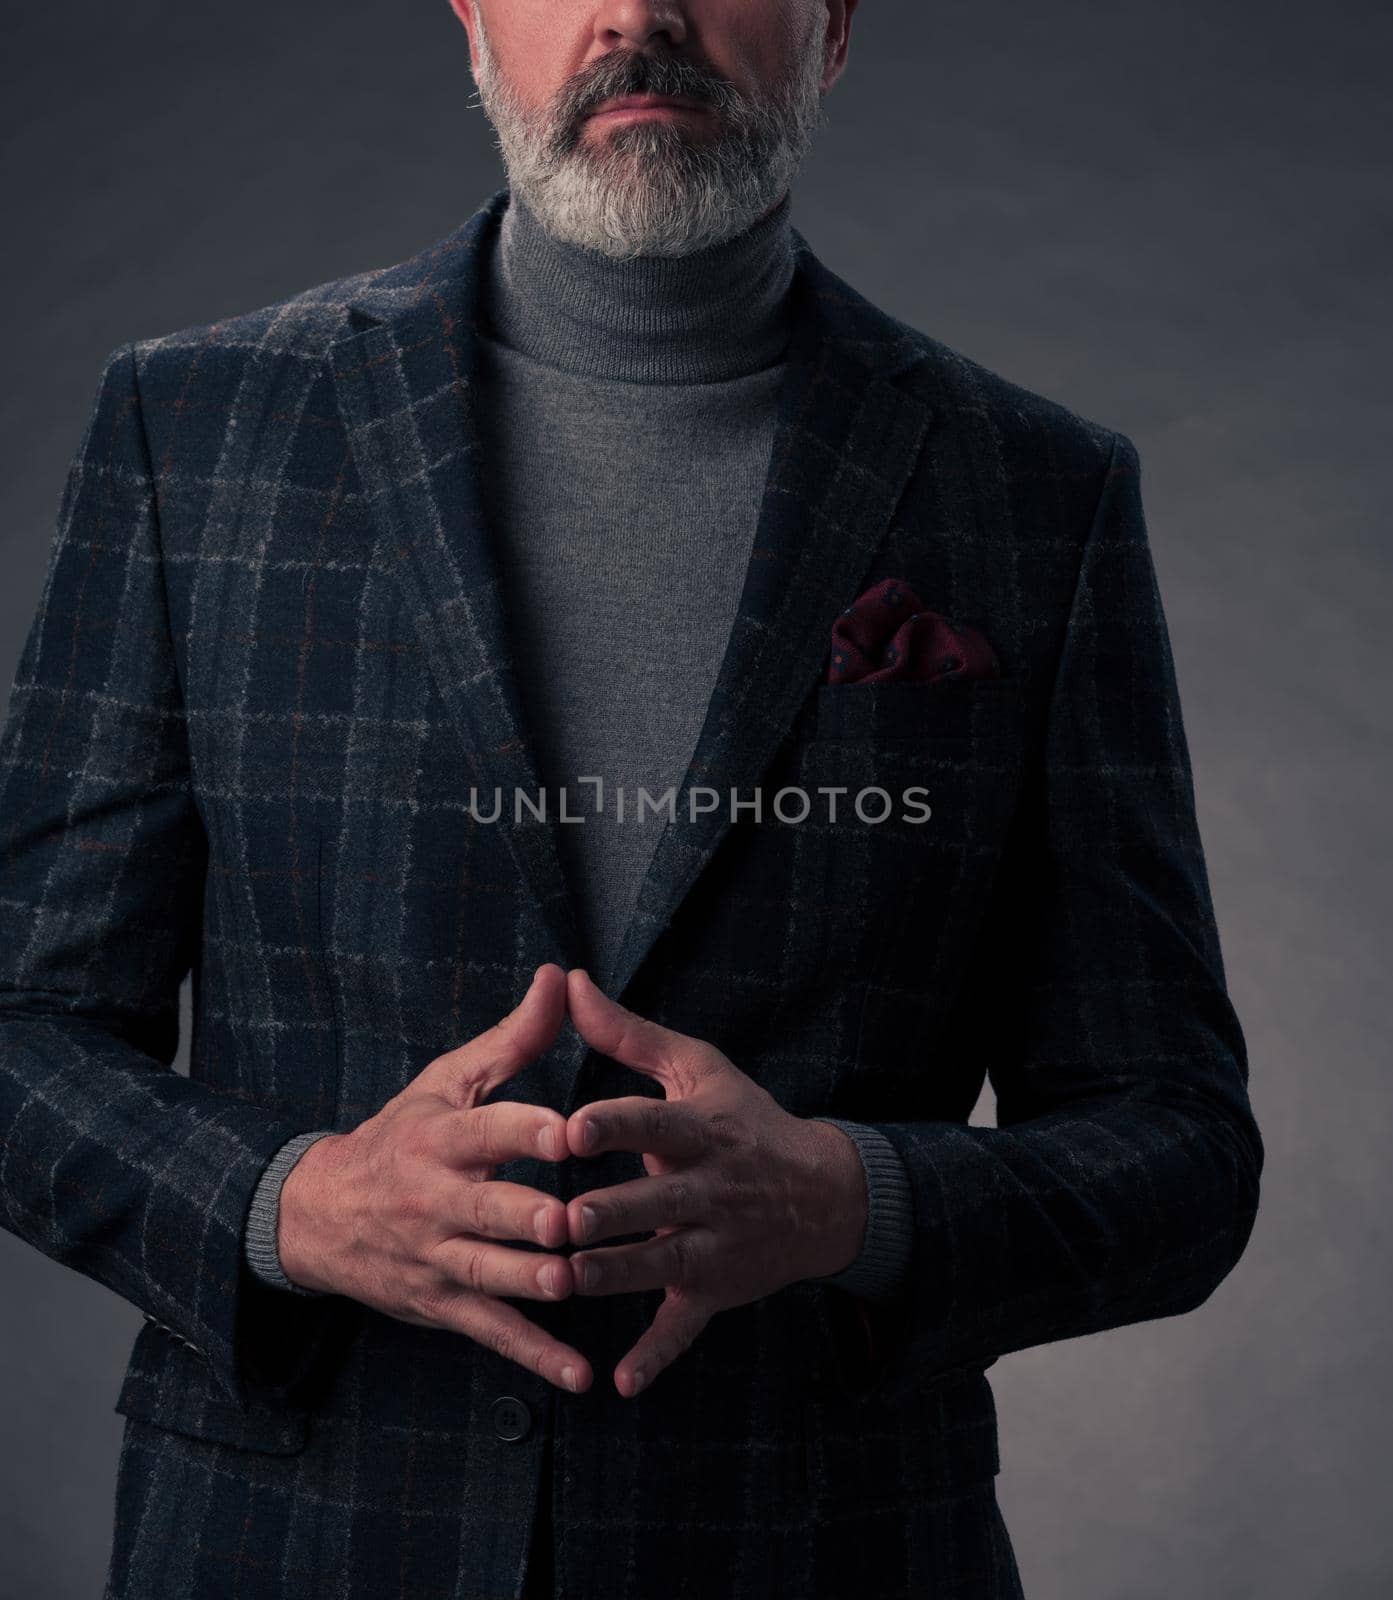 Portrait of a successful stylish elegant senior businessman with a grey beard and casual business clothes confident in photo studio isolated on dark background gesturing with hands. High-quality photo